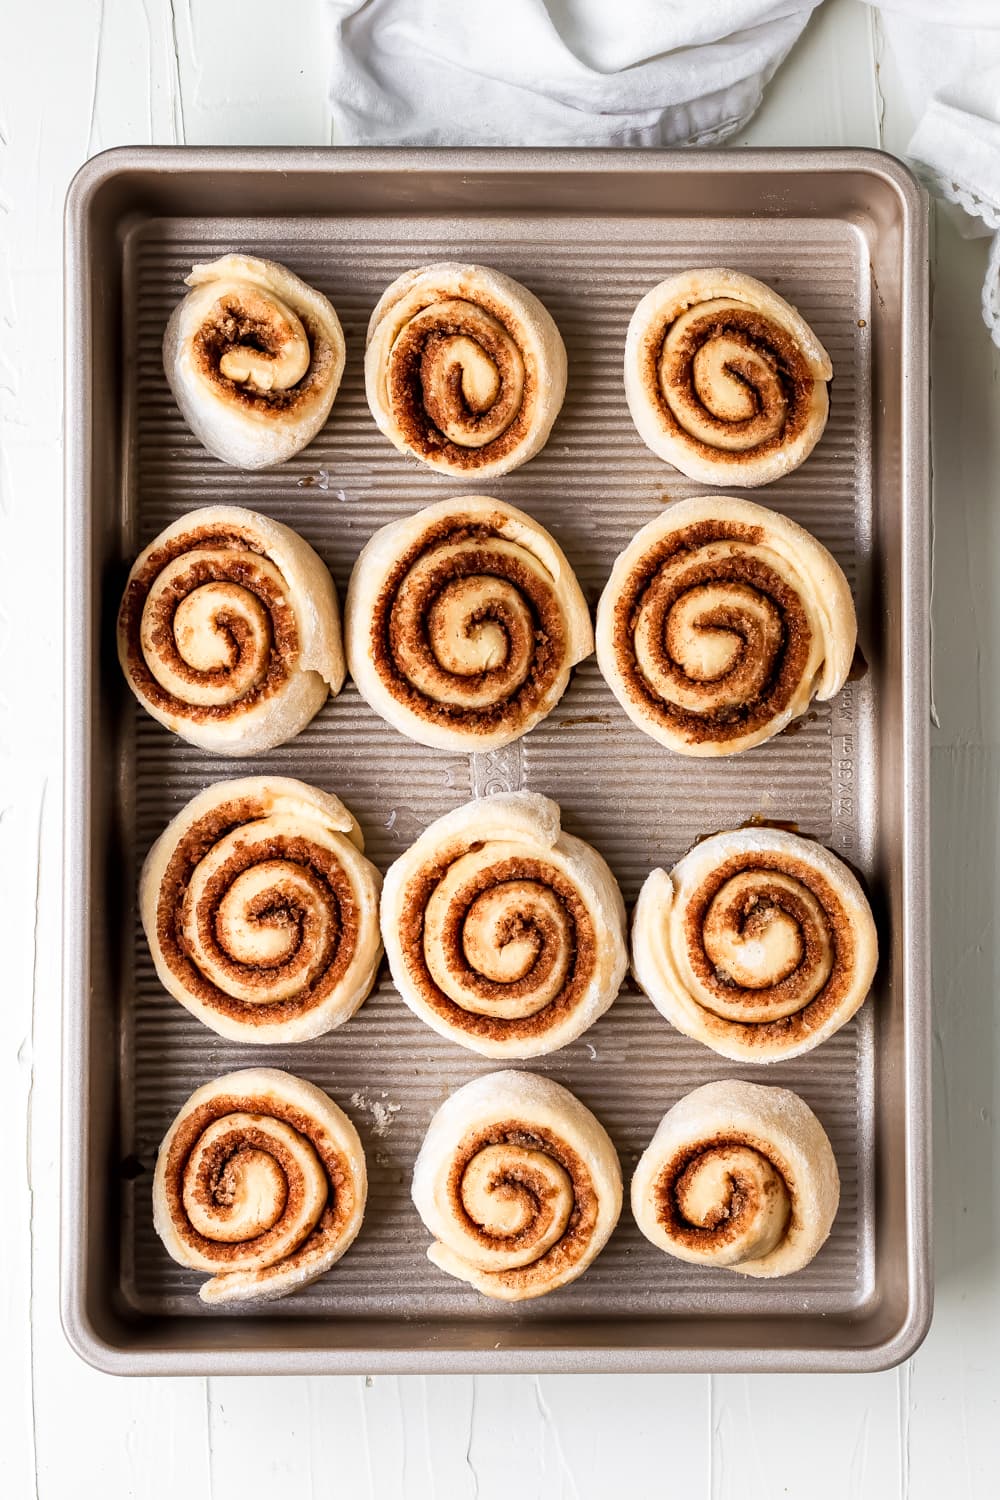 rolled up cinnamon rolls before baking on a baking dish